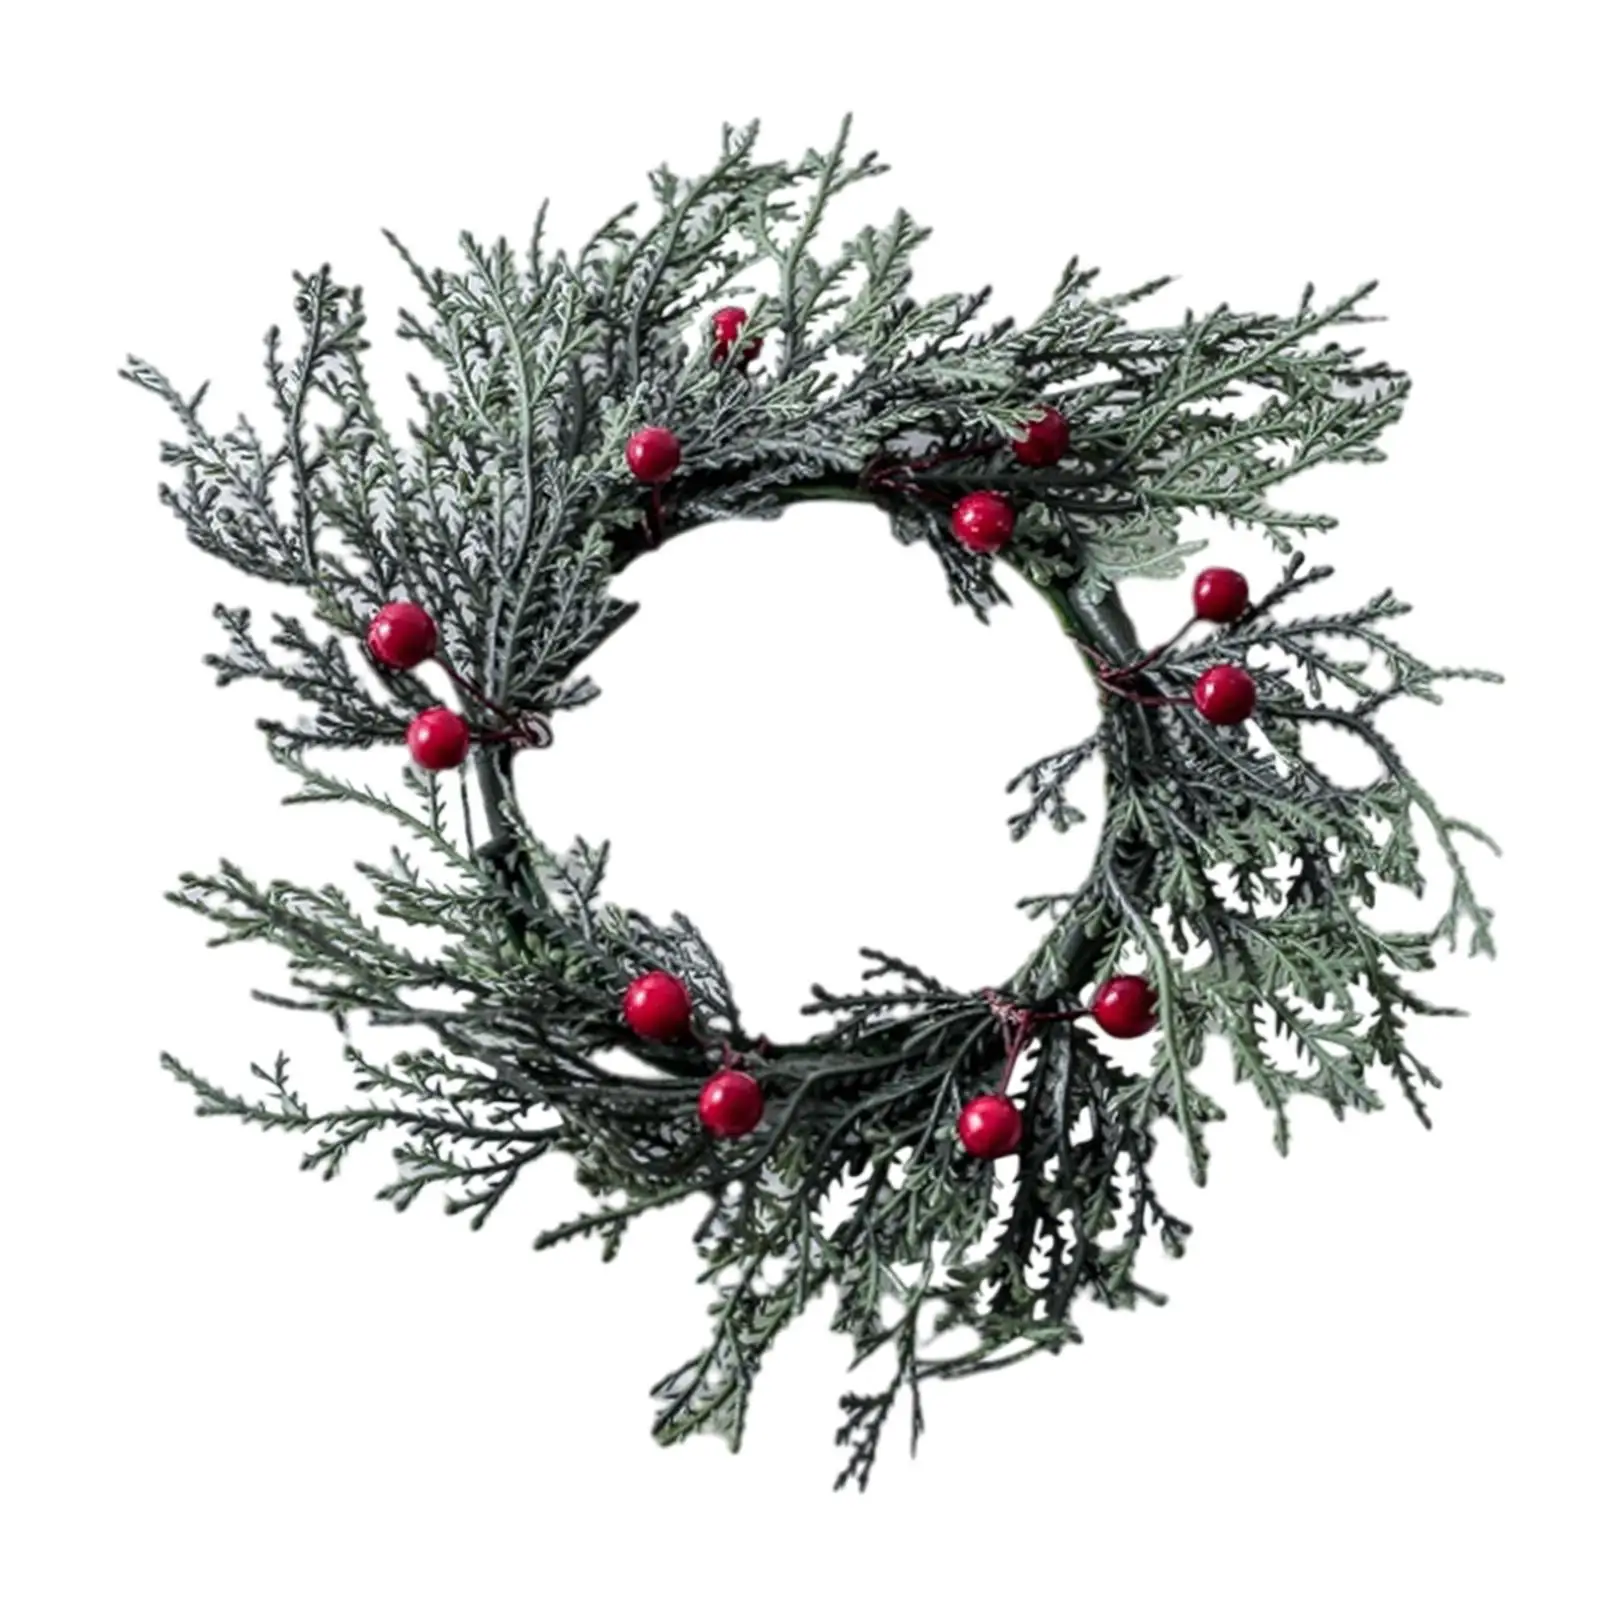 Christmas Candle Ring Simulation Red Berries Decorative Christmas Garland for Front Door Holiday Party Rustic Wedding Home Decor